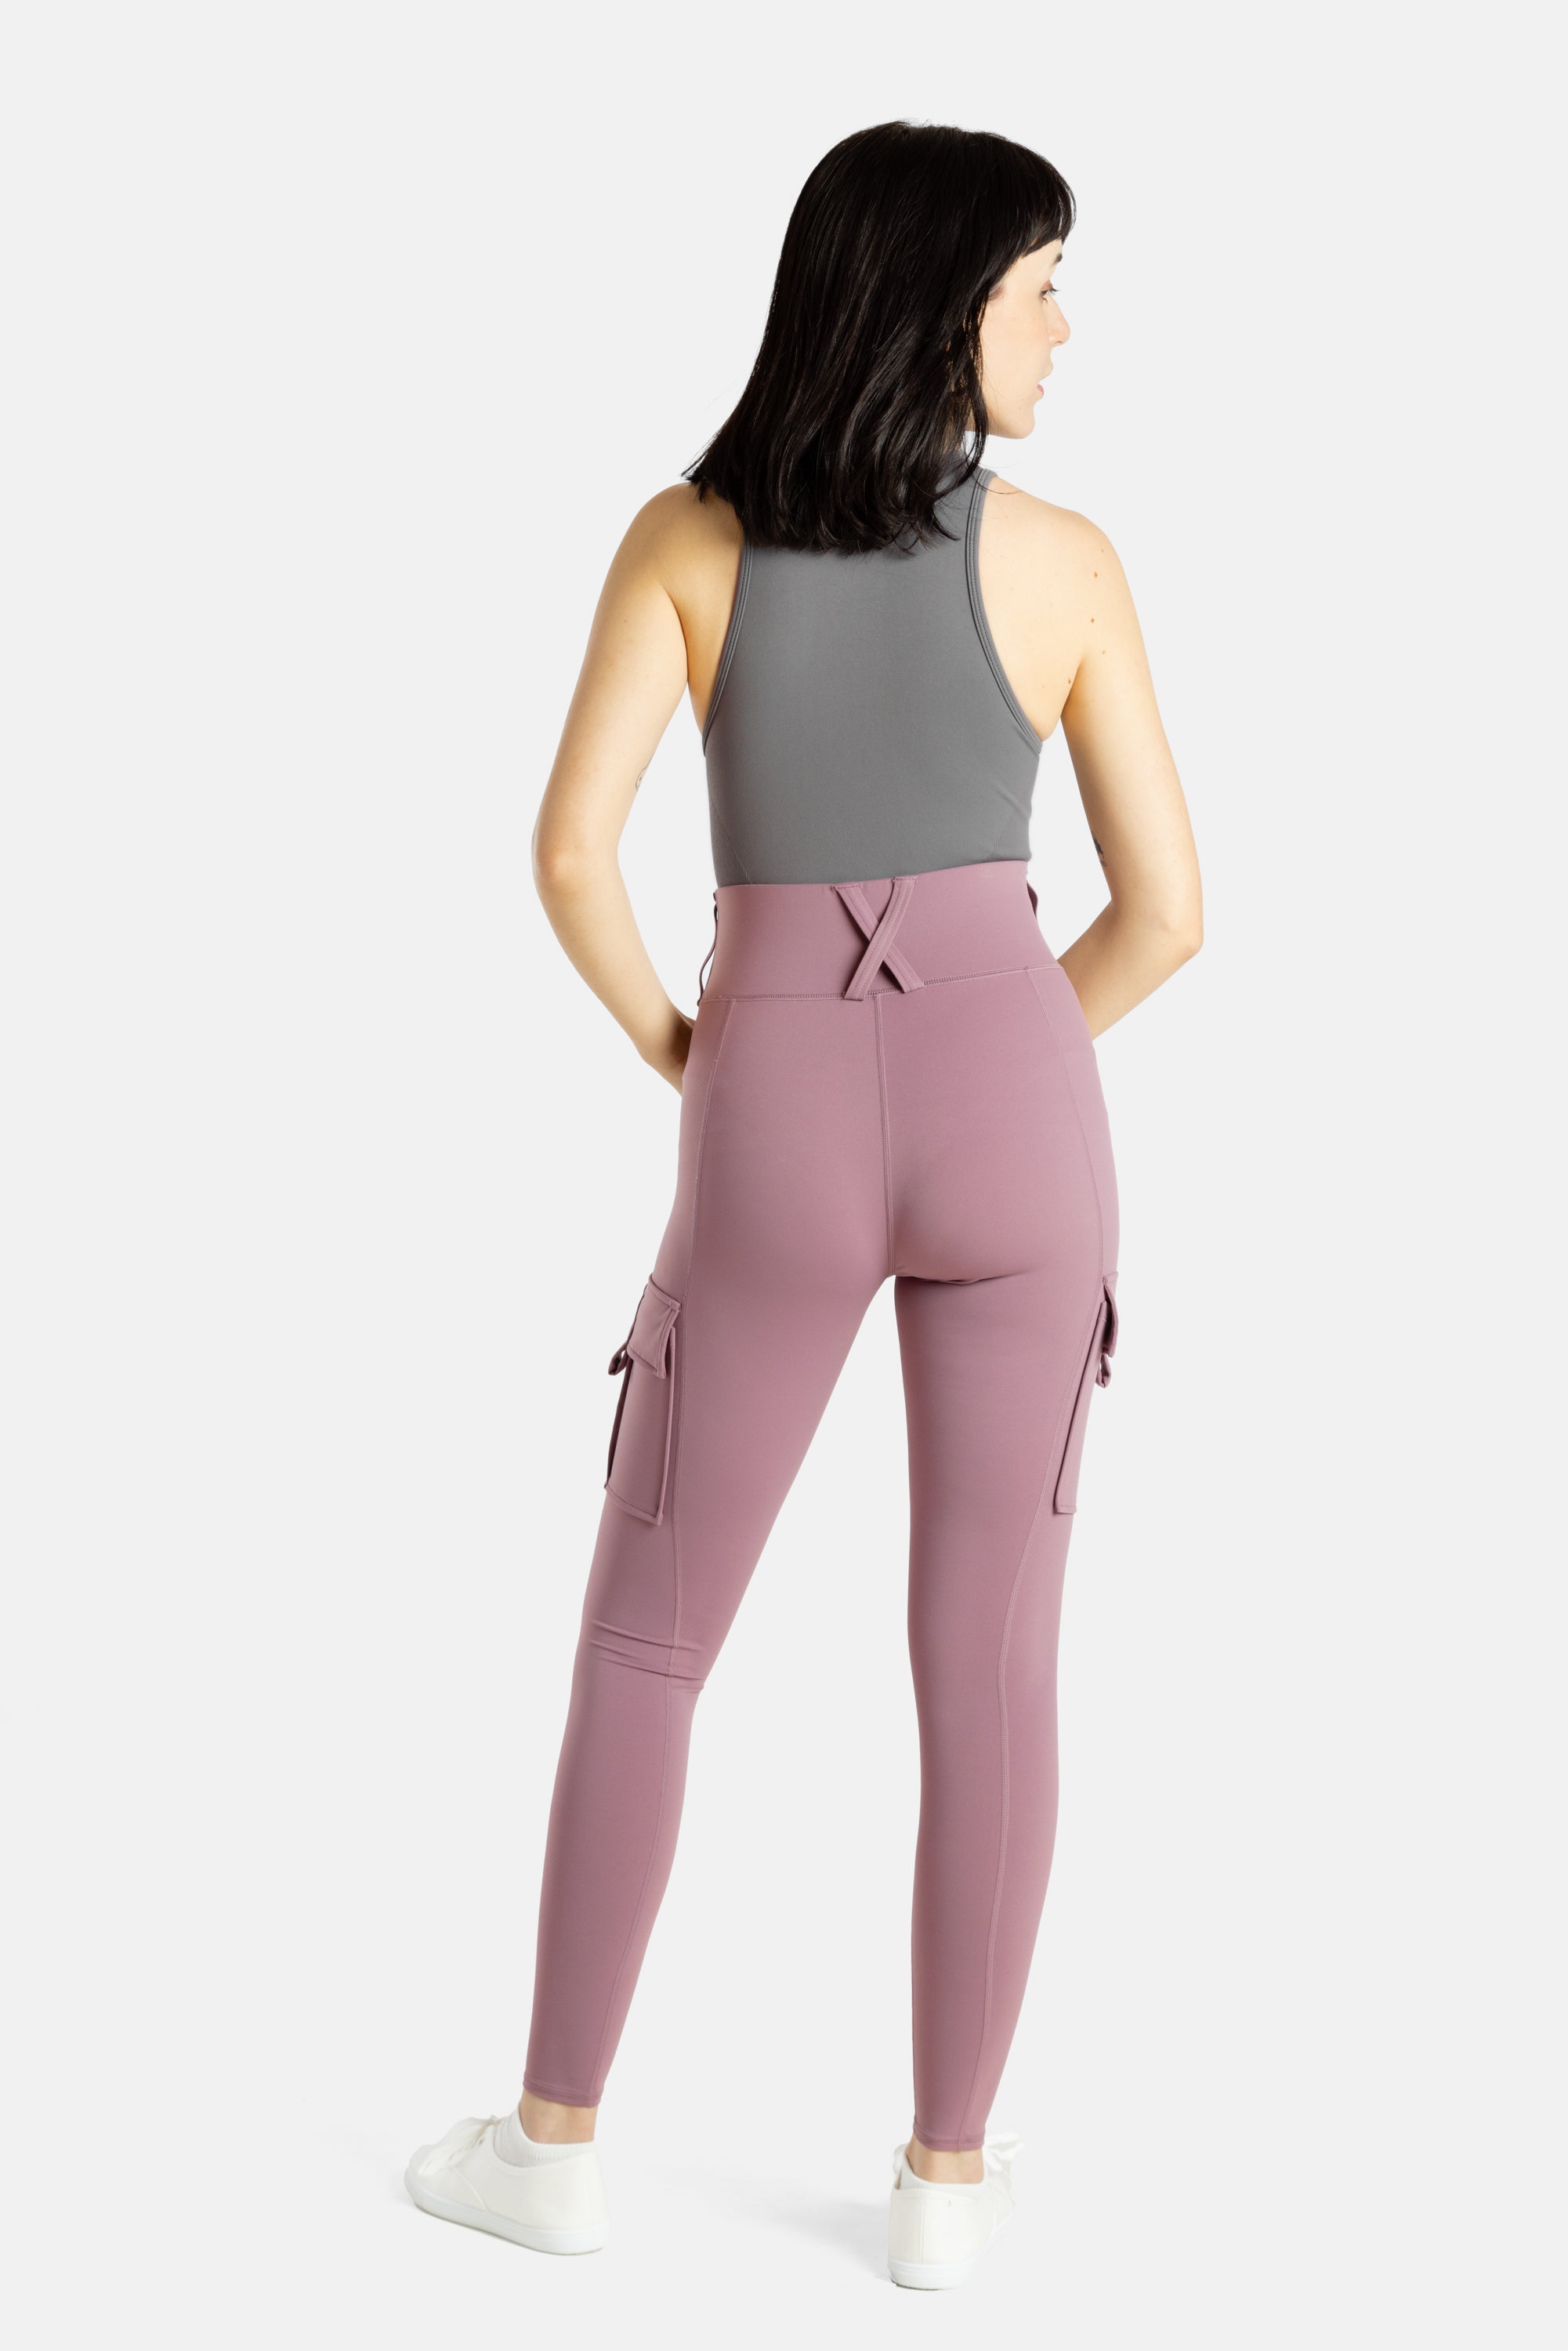 The back of a white woman (with long black hair and hoop earrings) wearing a charcoal tank top and mauve (Pinkish lavender) leggings.